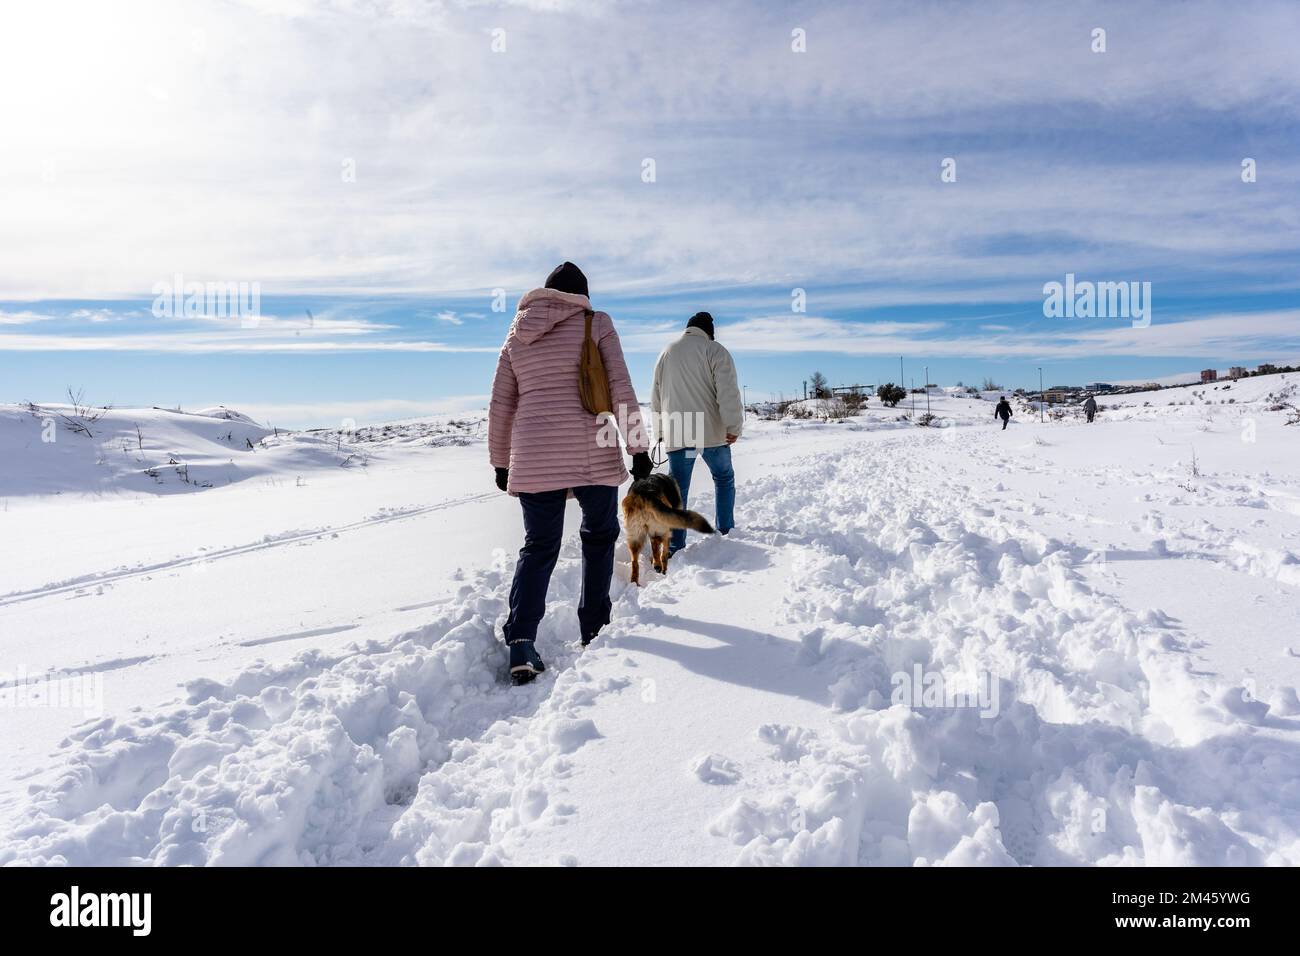 Two people walking with their dog outdoors on the snow in a winter day. Winter season concept. Stock Photo